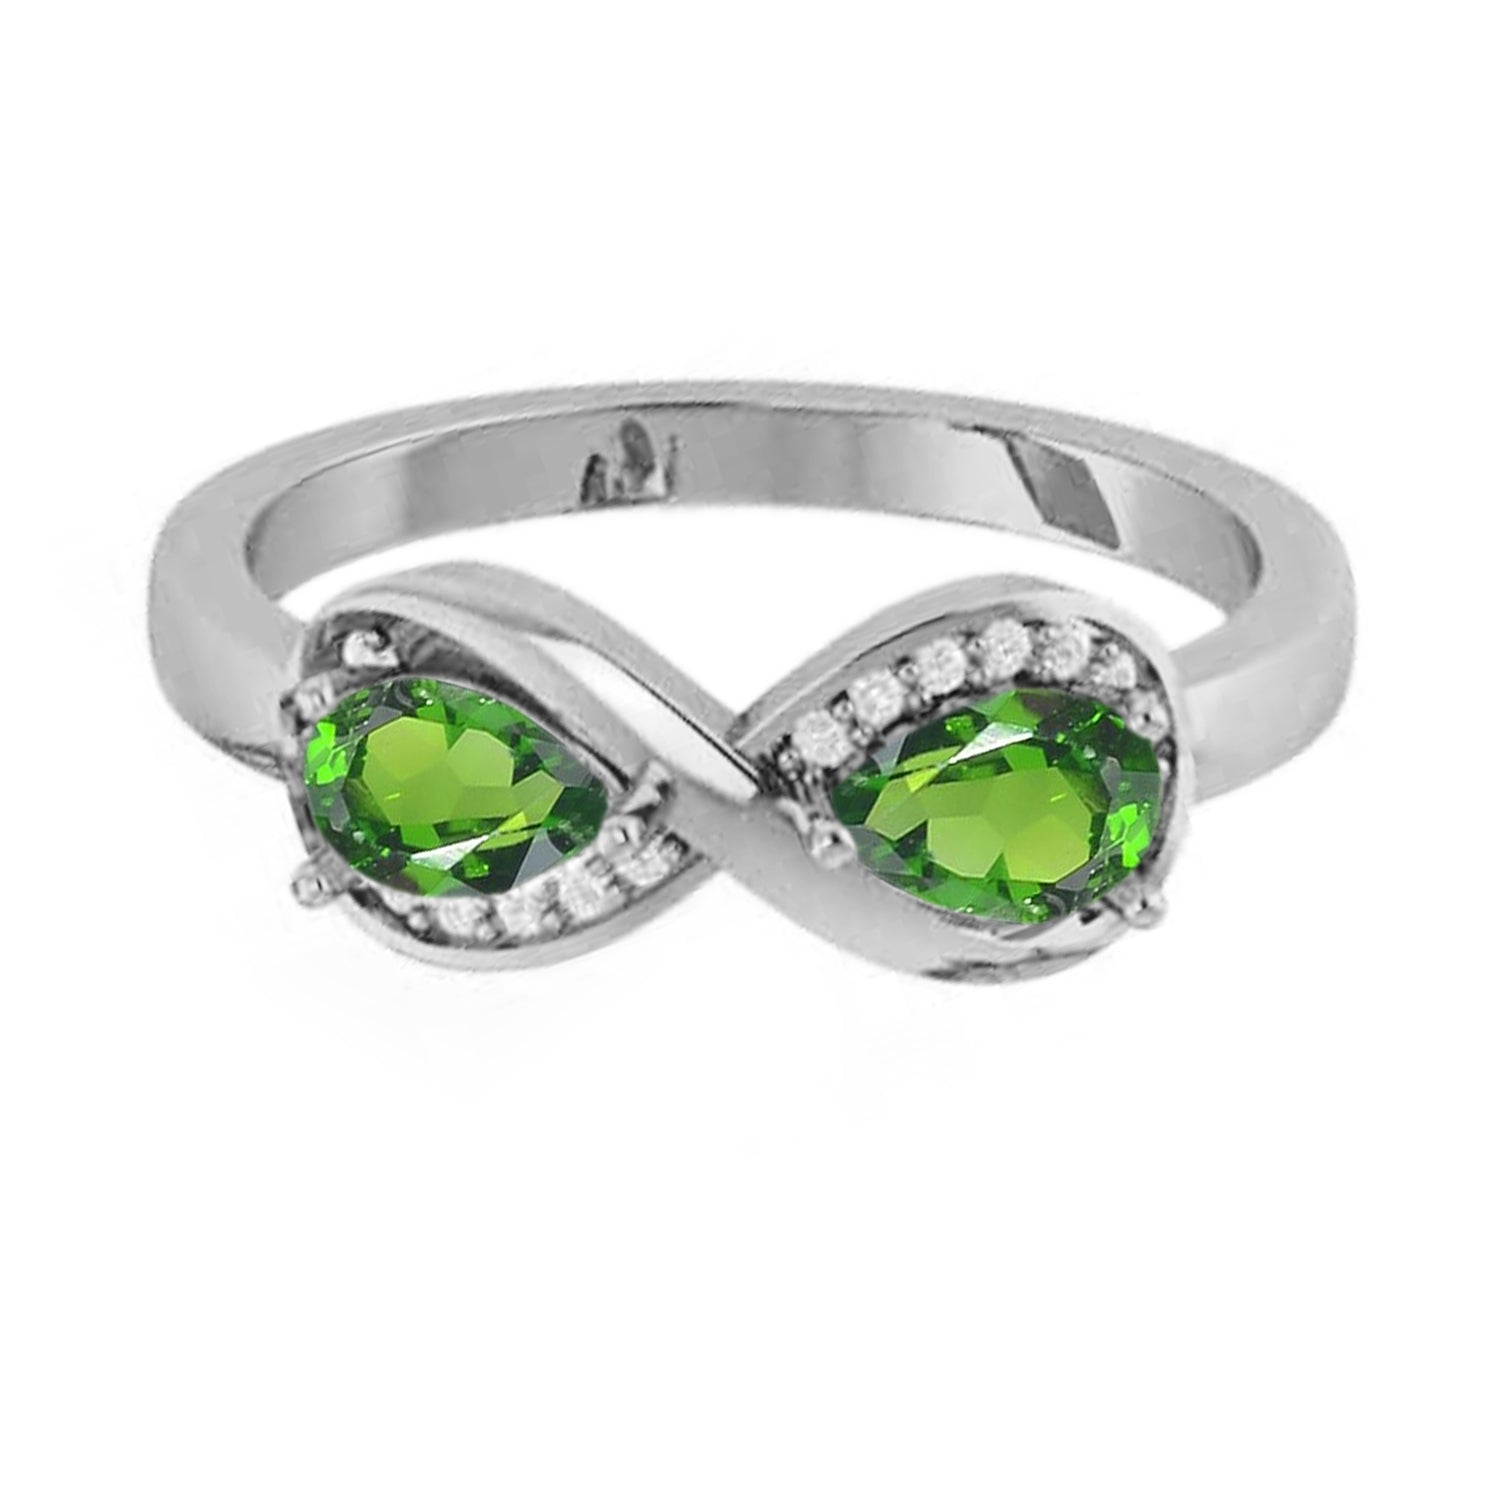 925 Sterling Silver Chrome Diopside, White Topaz Ring - Pinctore